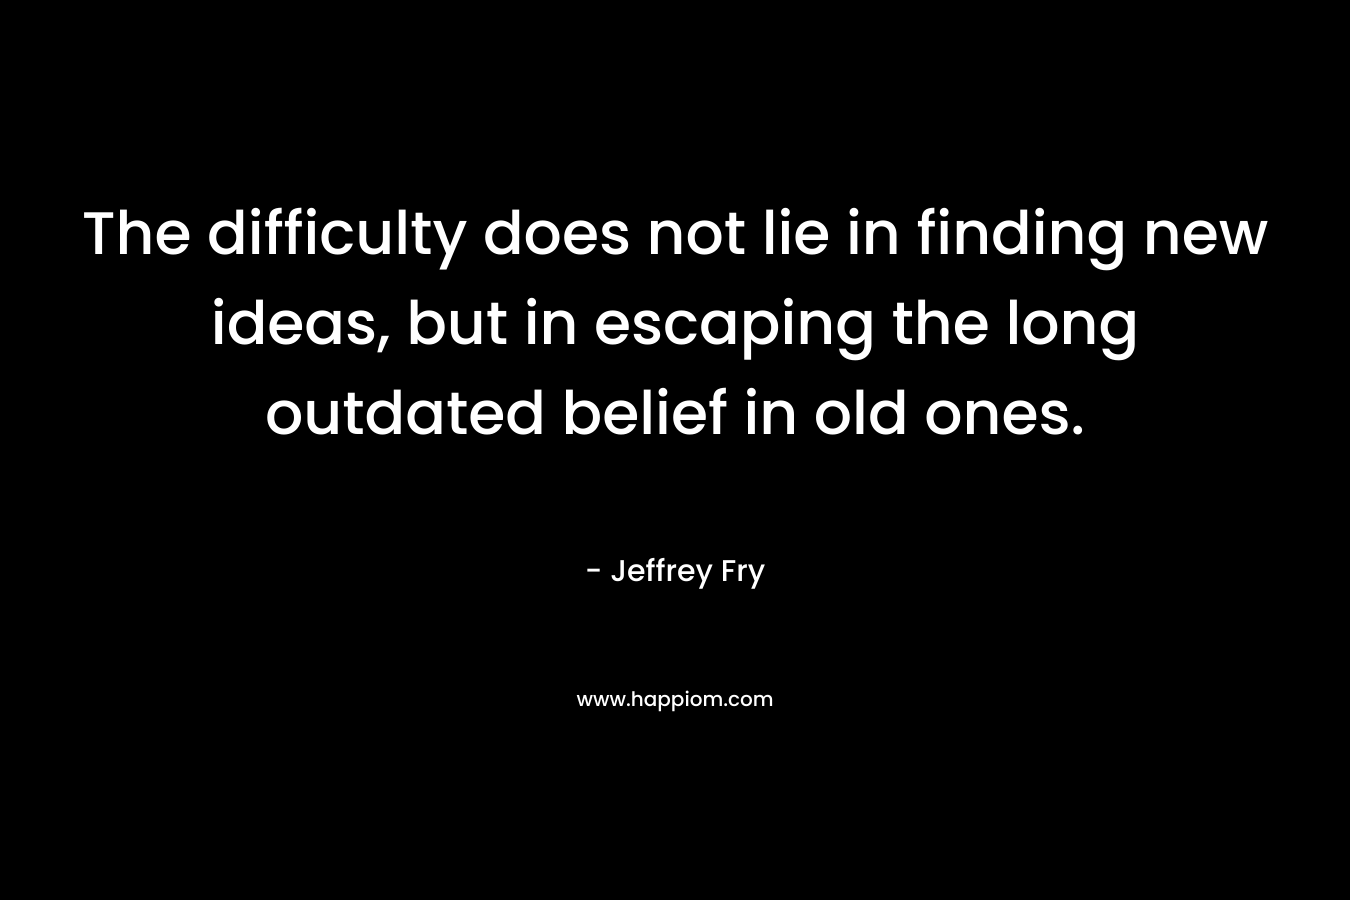 The difficulty does not lie in finding new ideas, but in escaping the long outdated belief in old ones.